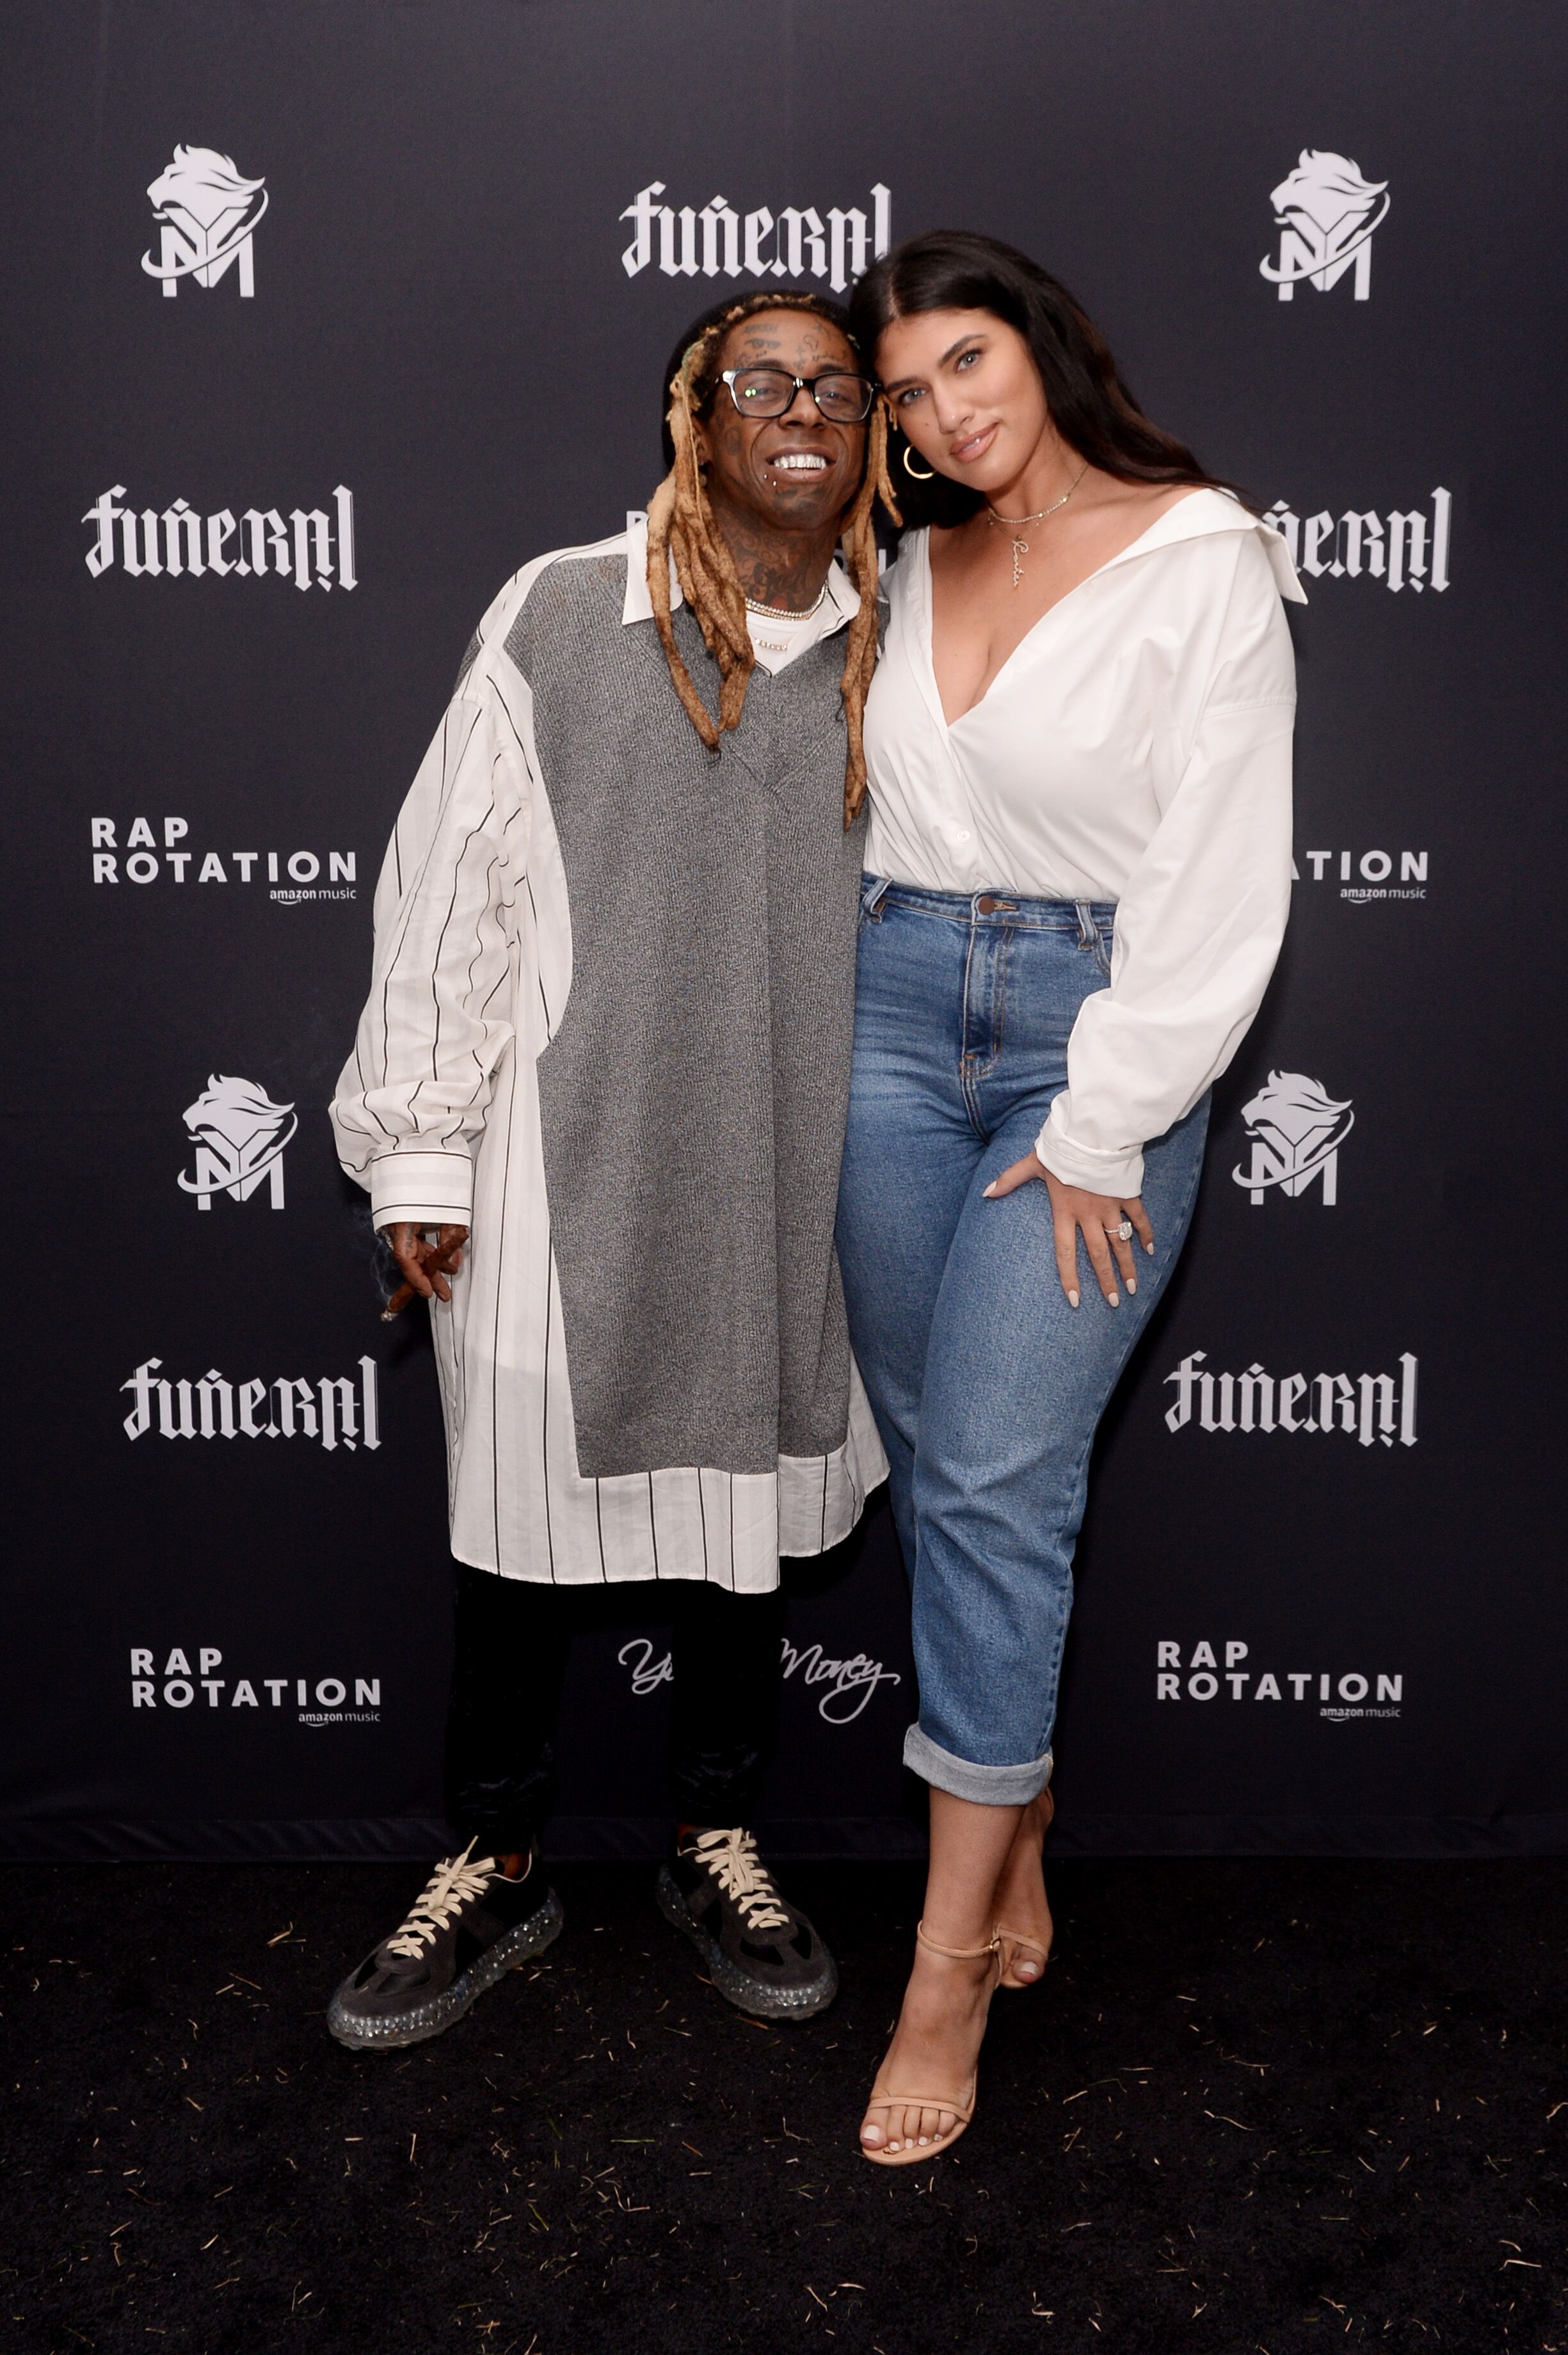 Lil Wayne and La'Tecia Thomas at the "Funeral" Launch Party | Source: Getty Images/GlobalImagesUkraine